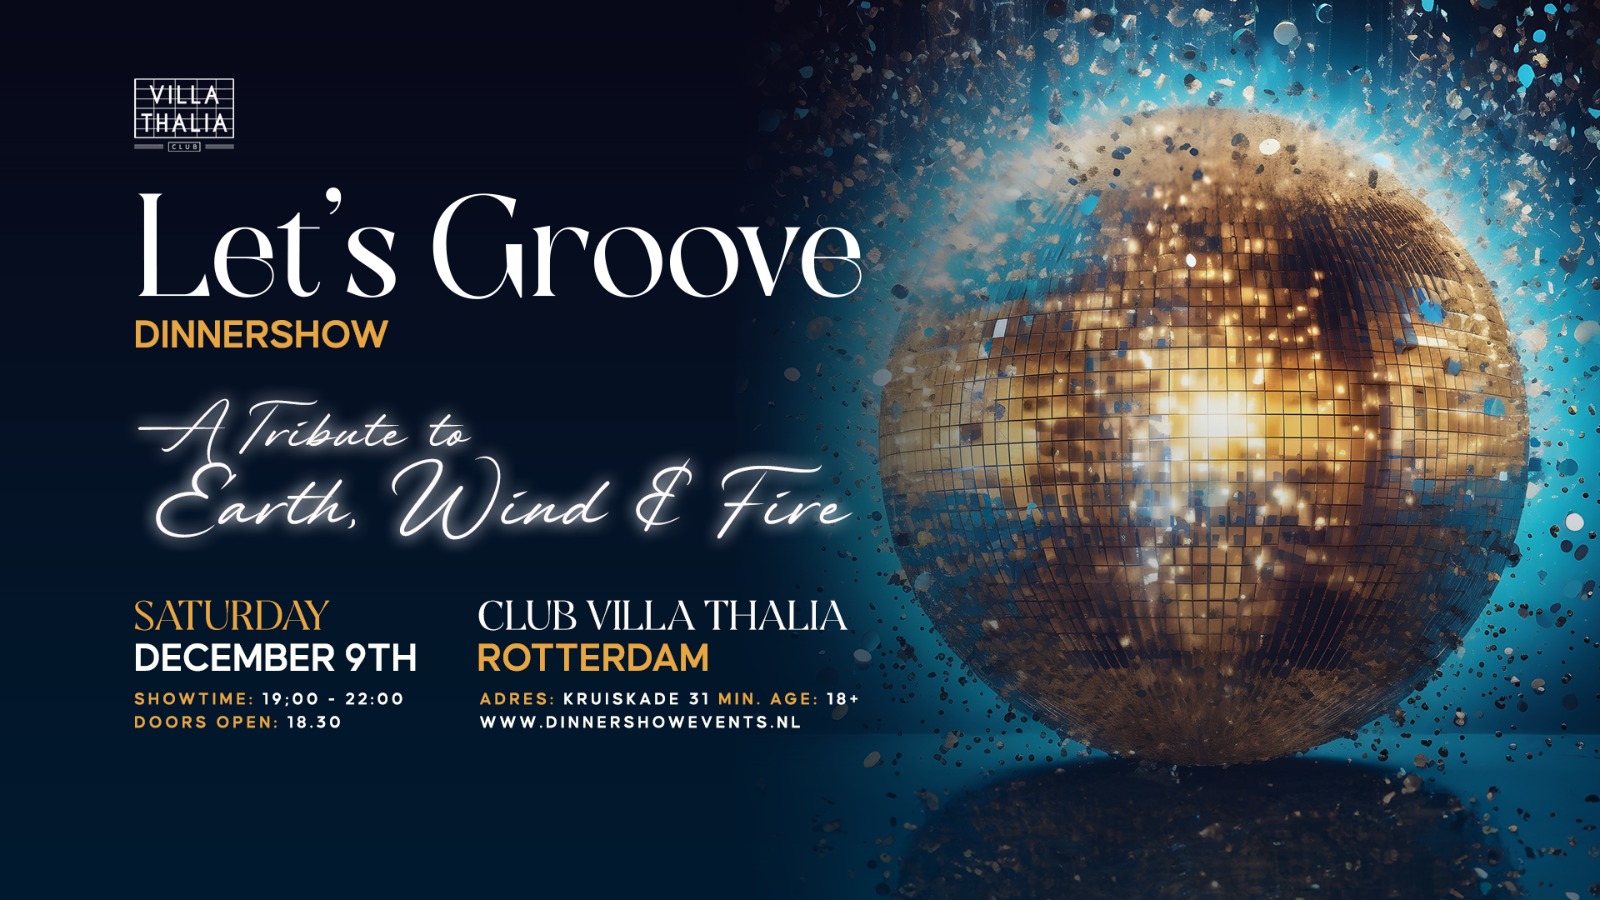 Tribute to Eart Wind & Fire | "Let's Groove" Dinnershow header